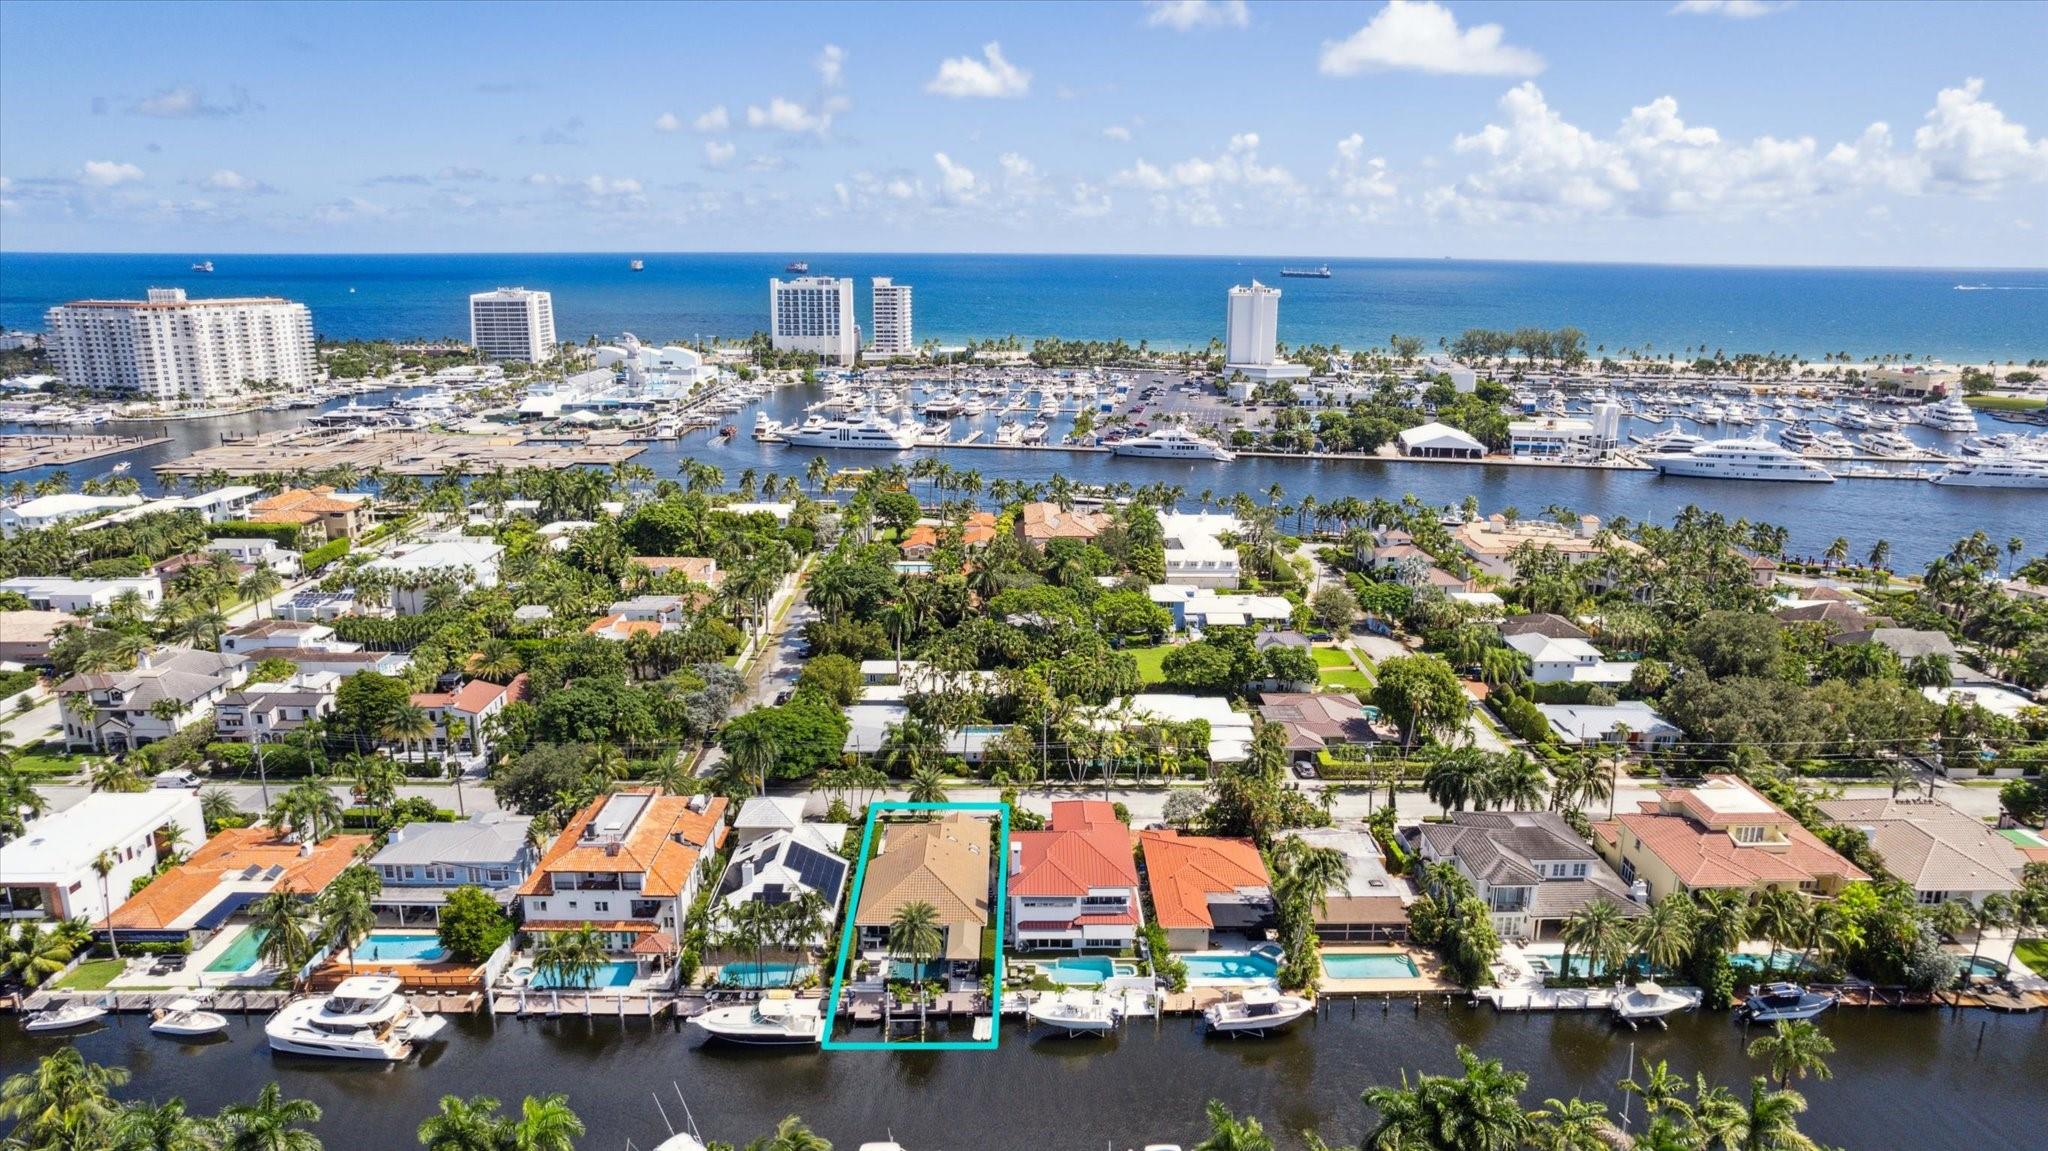 Updated waterfront Villa located in the desirable Las Olas neighborhood of Idlewyld. Deepwater ocean access with no fixed bridges and minutes to the inlet. Chefs kitchen with custom kitchen cabinets, six burner gas cooktop, double ovens, beverage center, two ice makers, 100 bottle wine refrigerator, all centered around a stunning blue Agate island. Bright, open and airy living spaces view the resort style pool and canal. Generous scaled primary bedroom views the water and has a sitting area. Renovated primary bath has vaulted ceilings and a beautiful stone accent wall. This well maintained three bedroom plus den home has been updated throughout. Walking distance to the ocean, restaurants and entertainment.